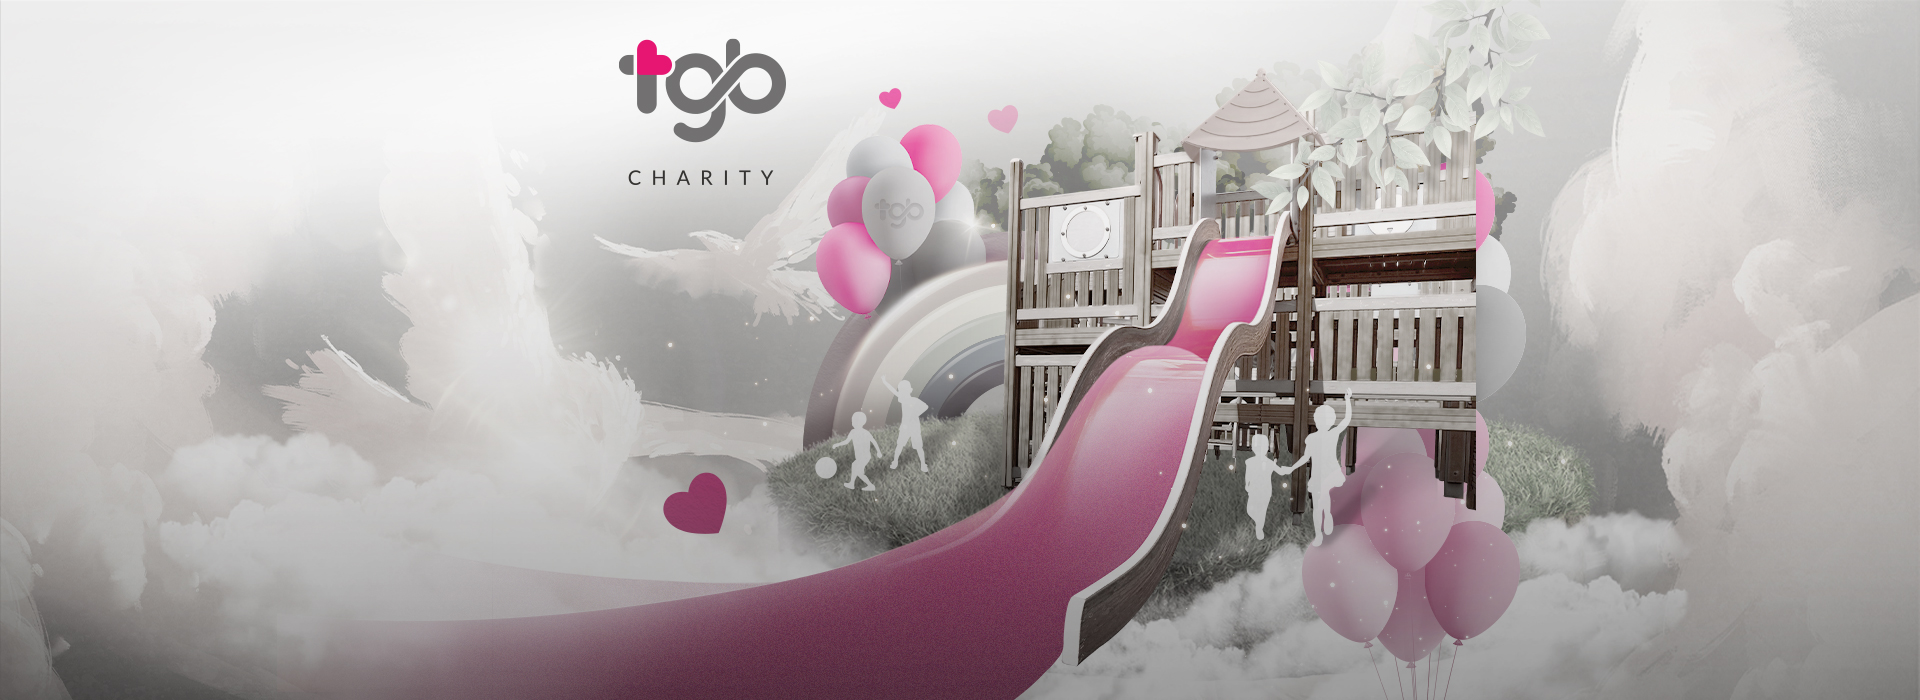 TGB Charity Builds Hope in Japan